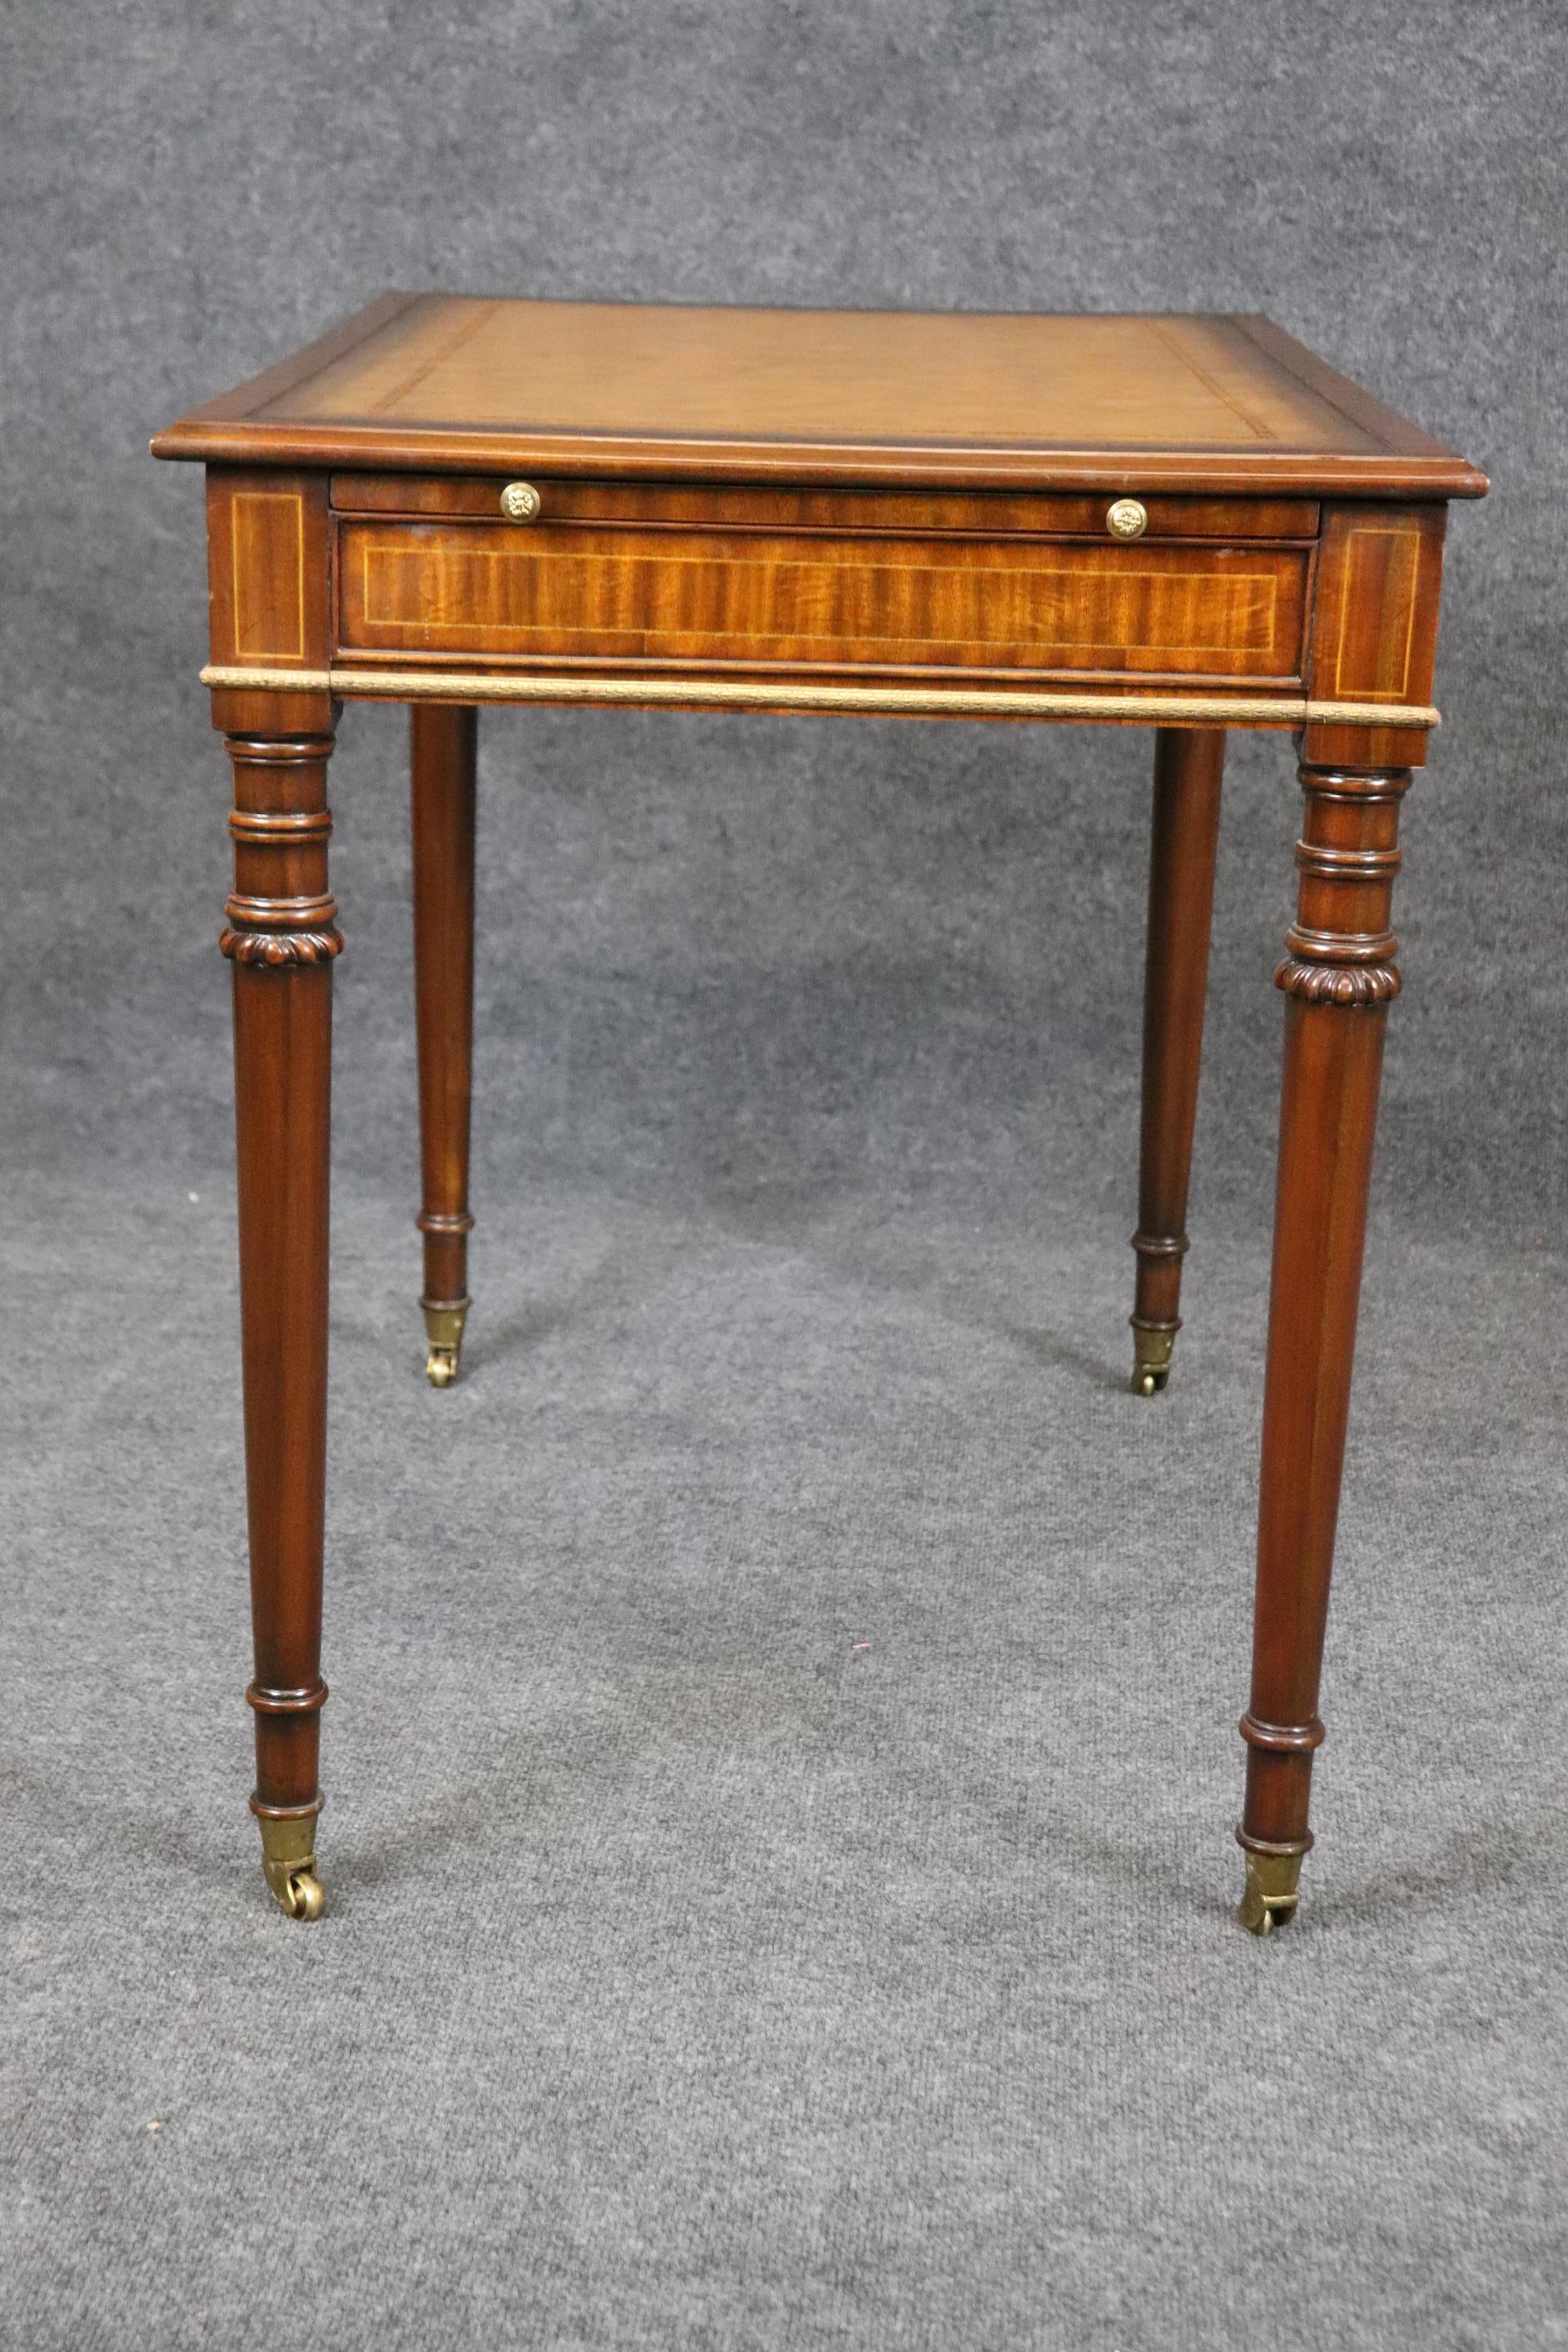 Yellow Ochre Leather Top Maitland Smith Regency Mahogany Desk with Trays For Sale 1